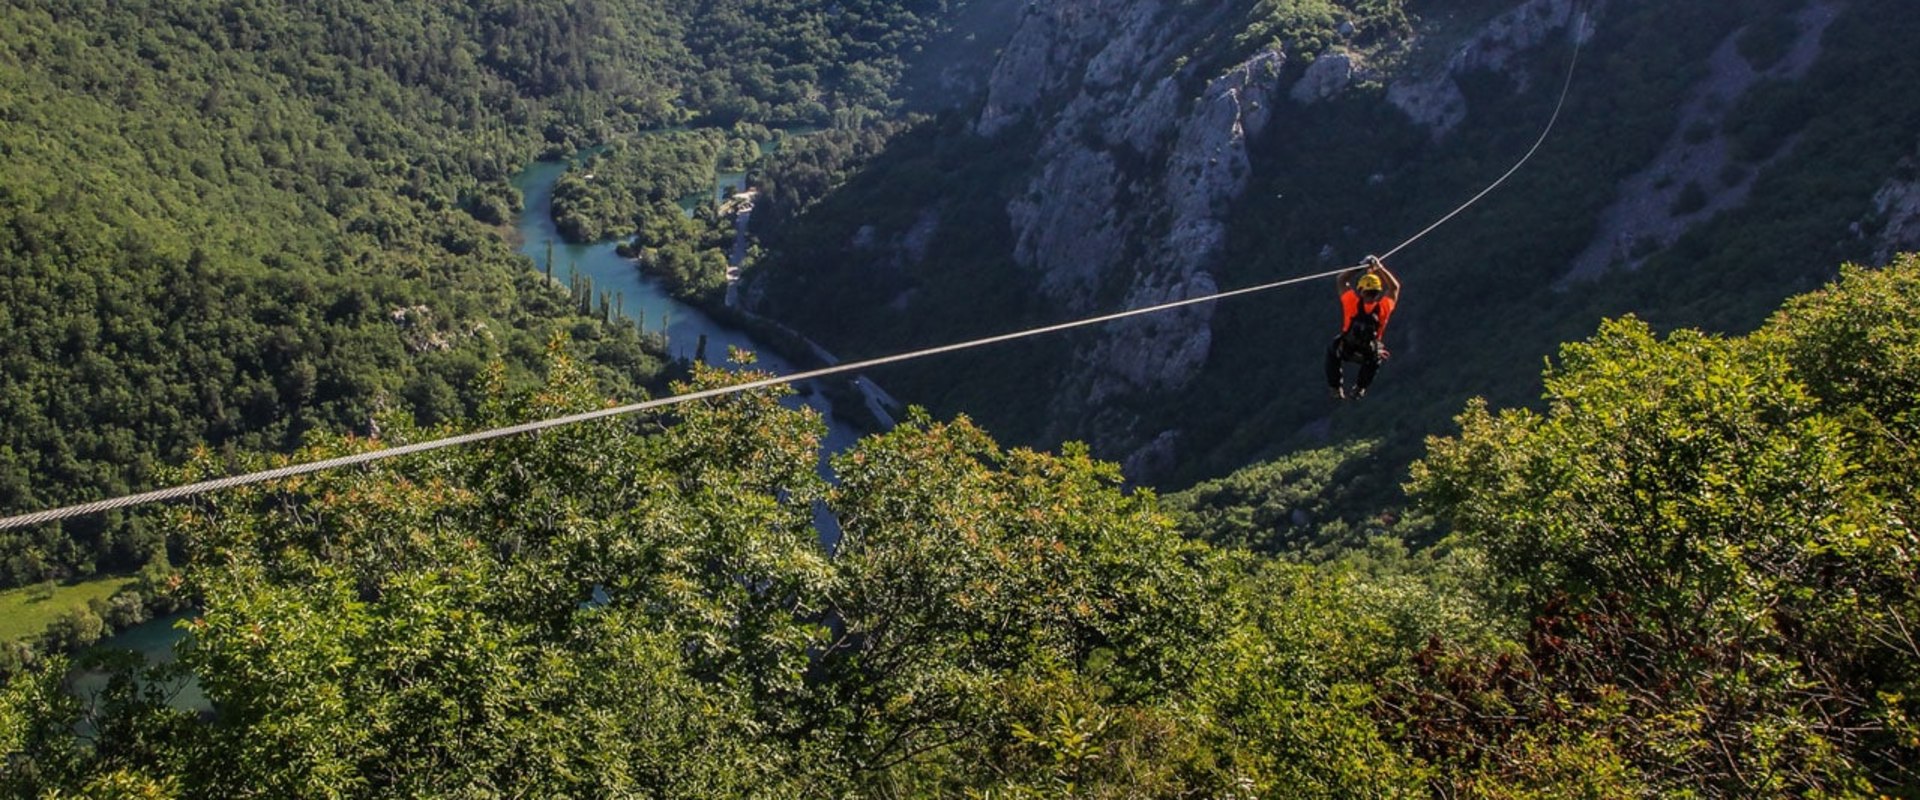 What are the top 10 ziplines in the world?